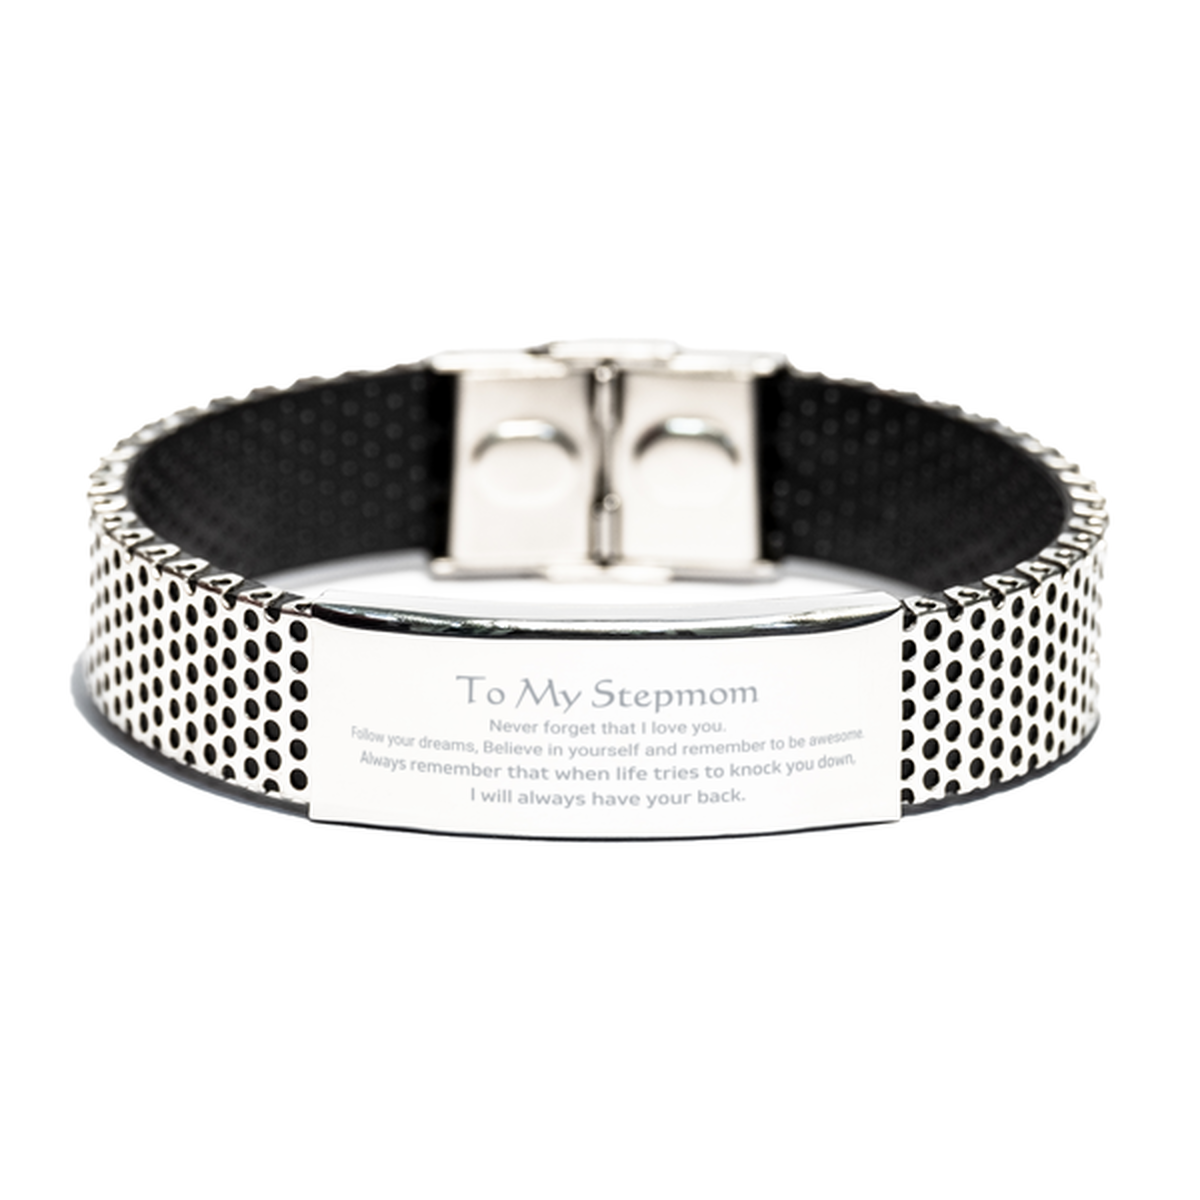 Inspirational Gifts for Stepmom, Follow your dreams, Believe in yourself, Stepmom Stainless Steel Bracelet, Birthday Christmas Unique Gifts For Stepmom